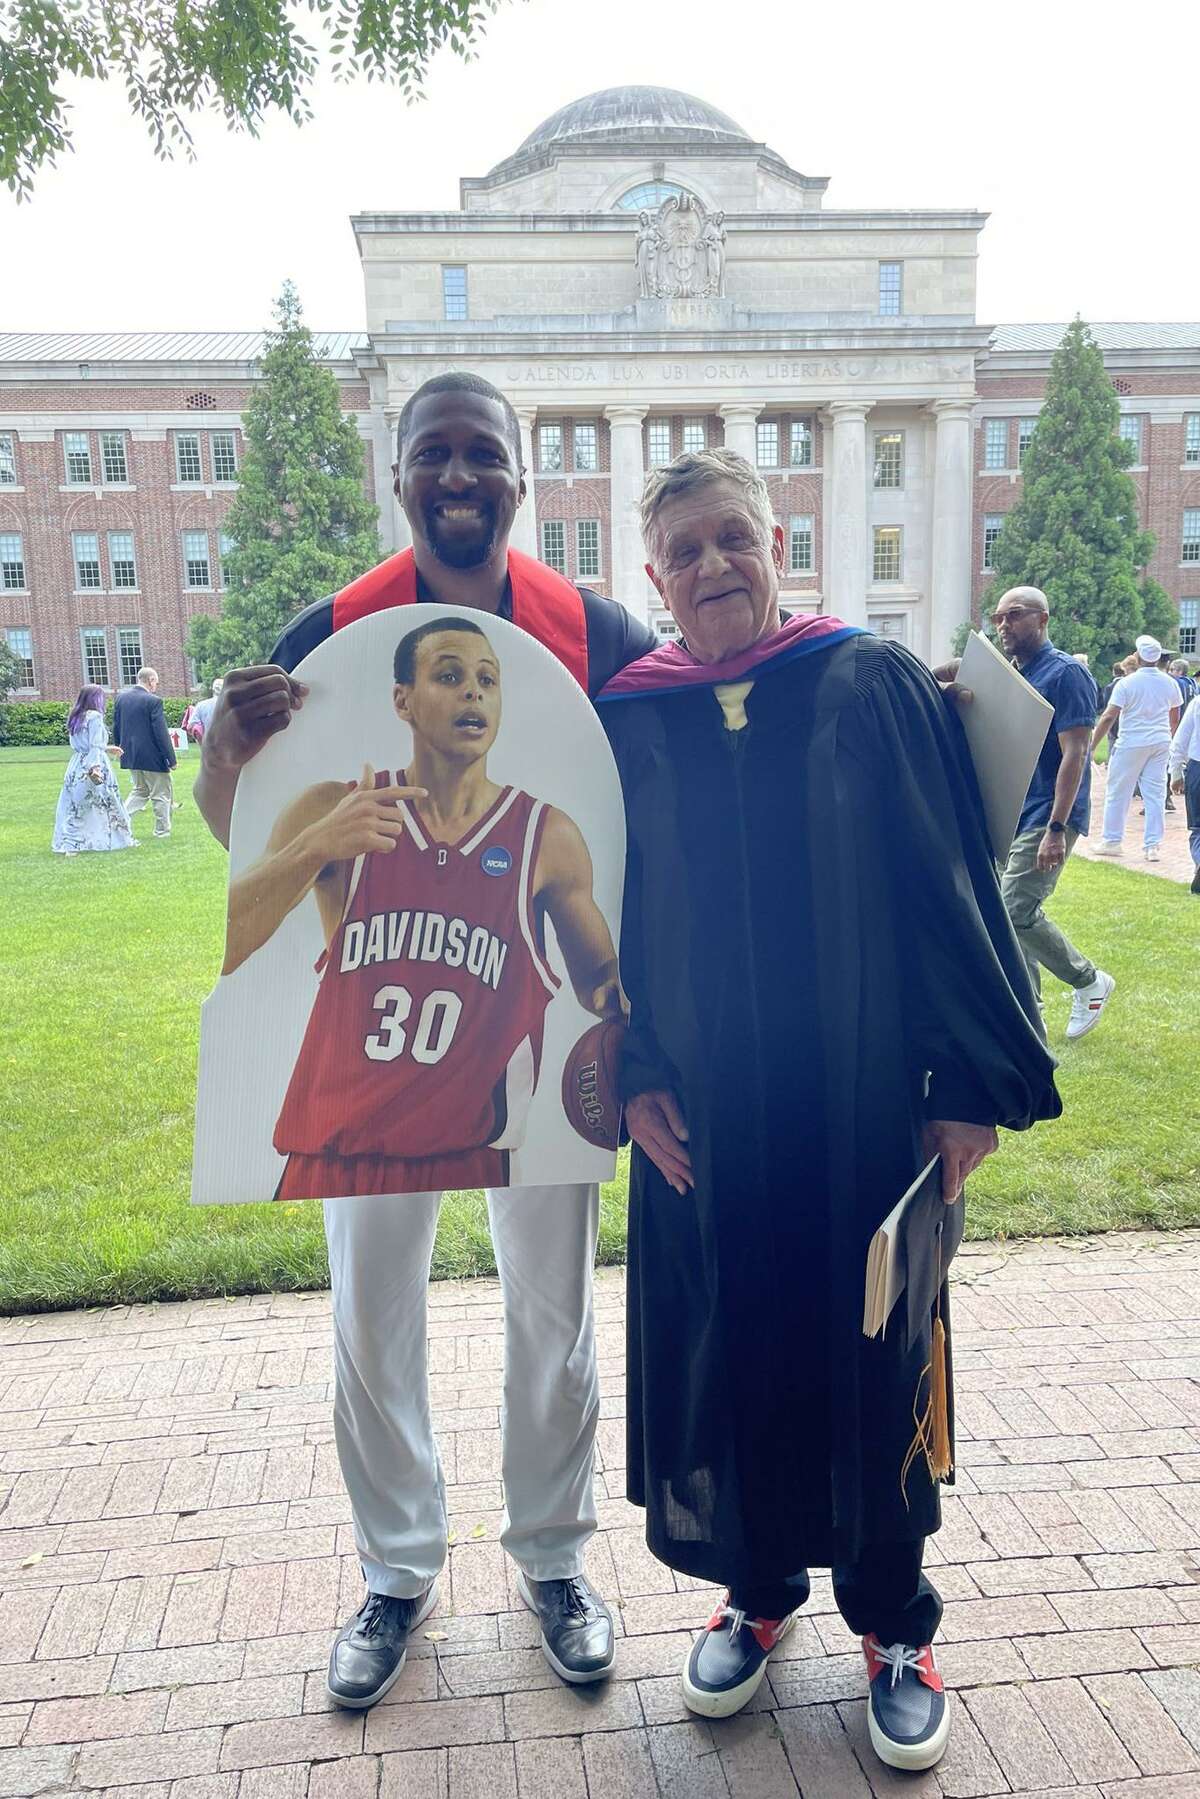 Director of Athletics Chris Clunie and Dr. Clark Ross with the Stephen Curry fathead at the Davidson commencement.